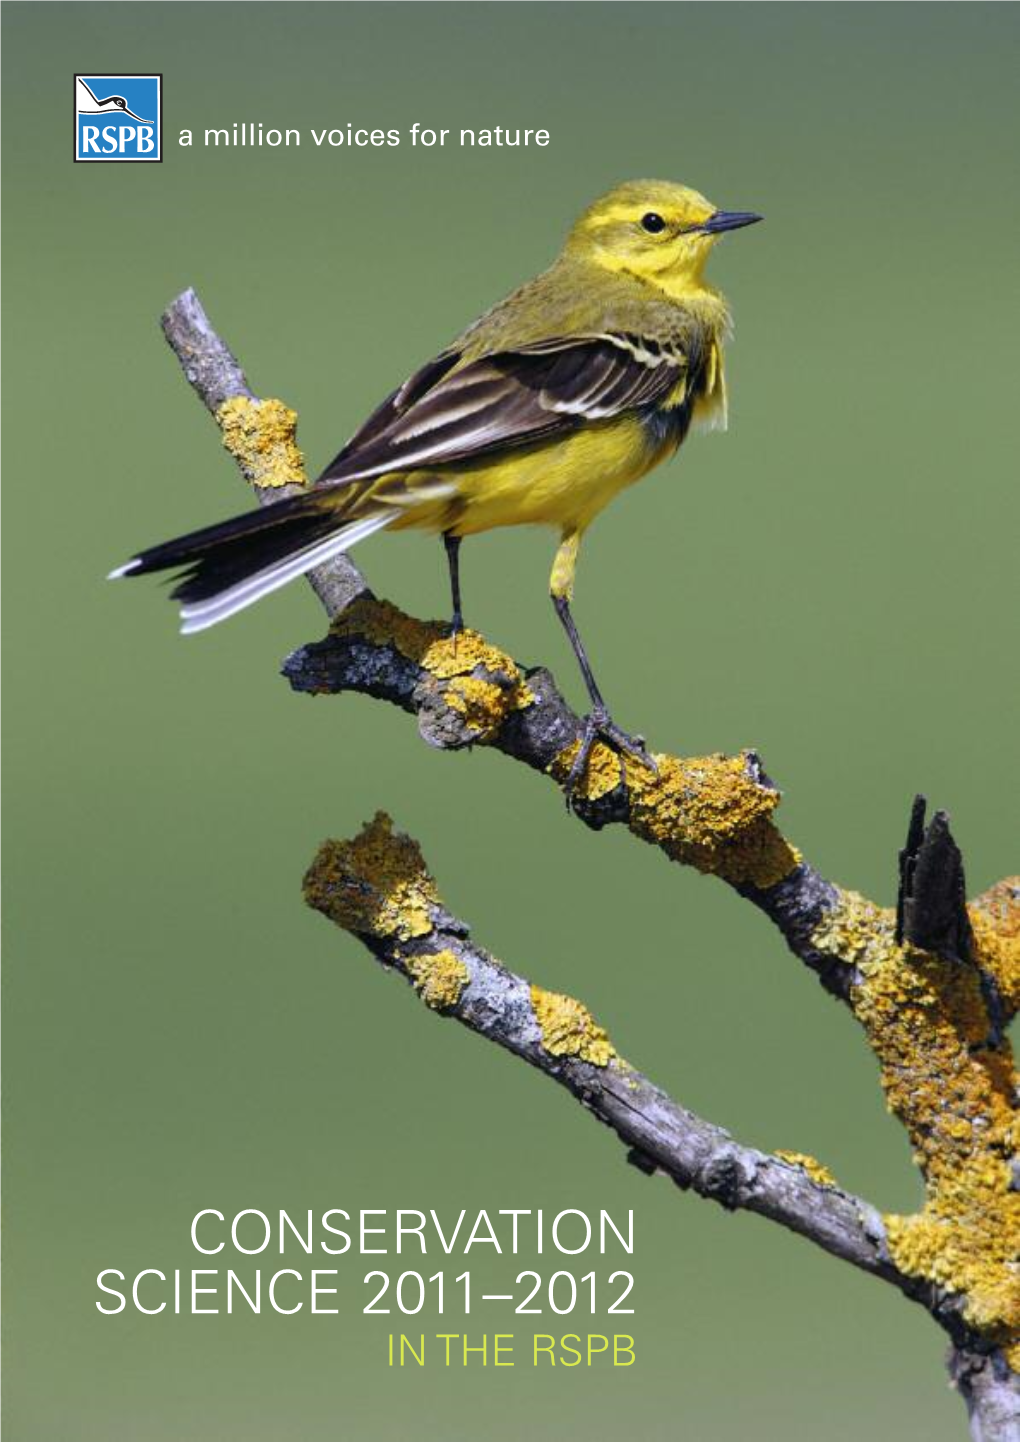 Conservation Science in the RSPB 2011-2012